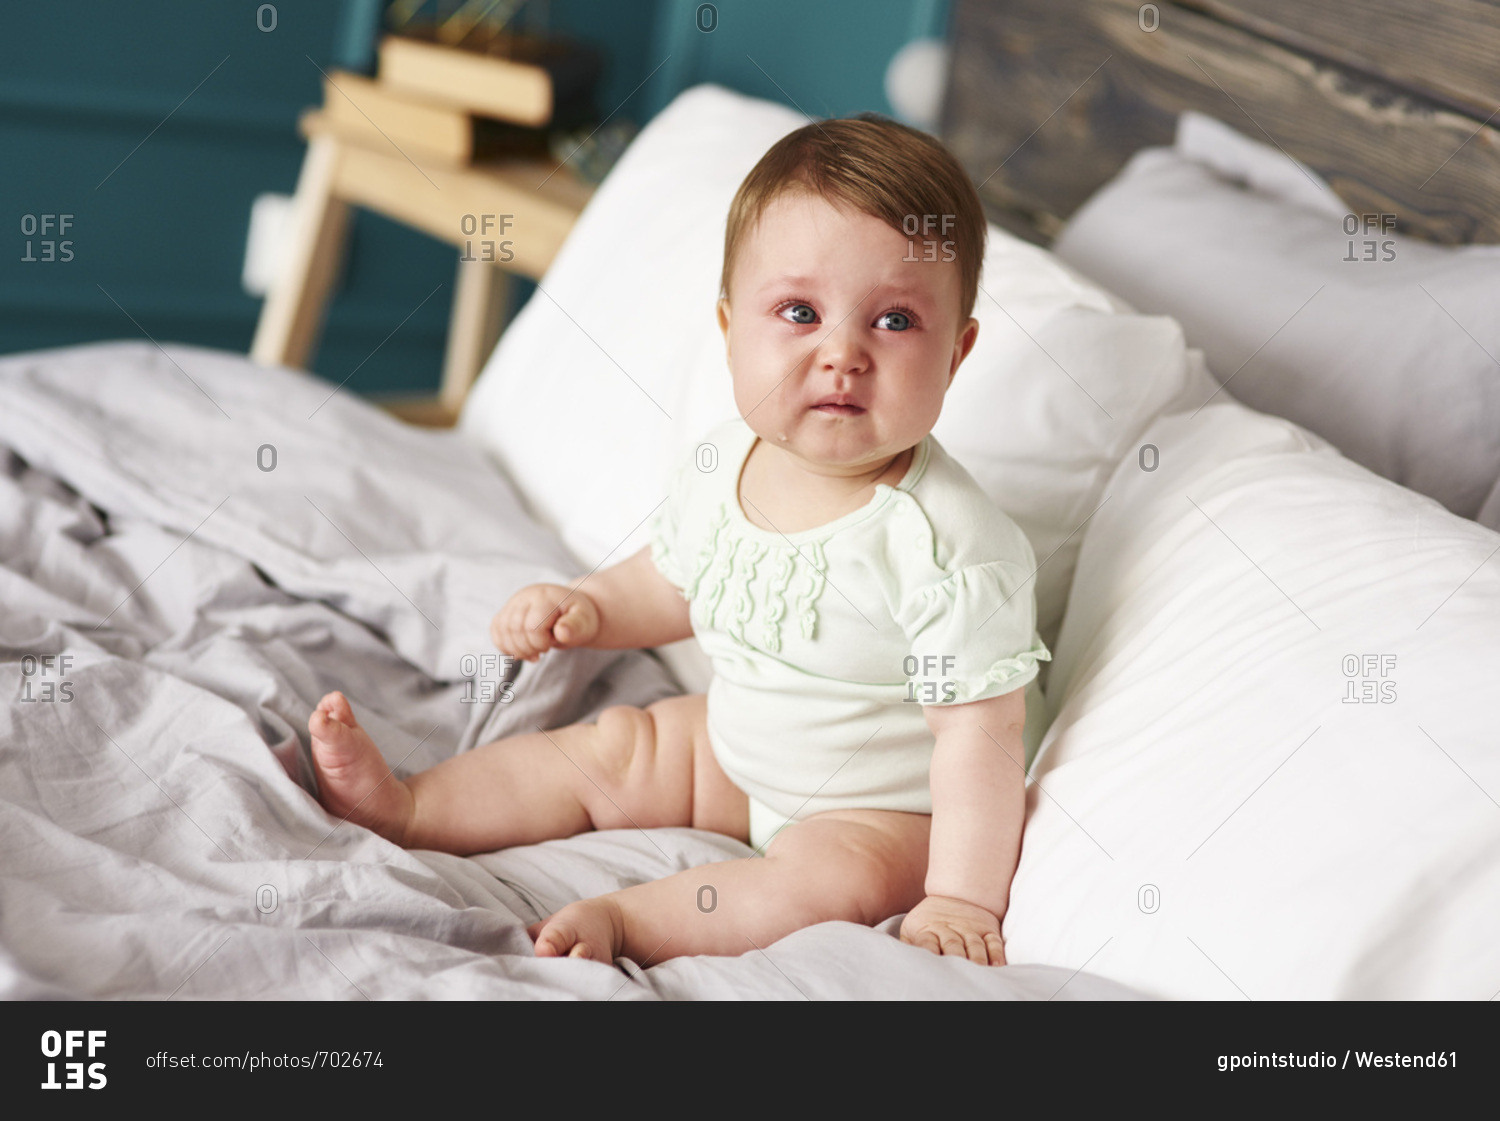 Sad baby crying on bed at home